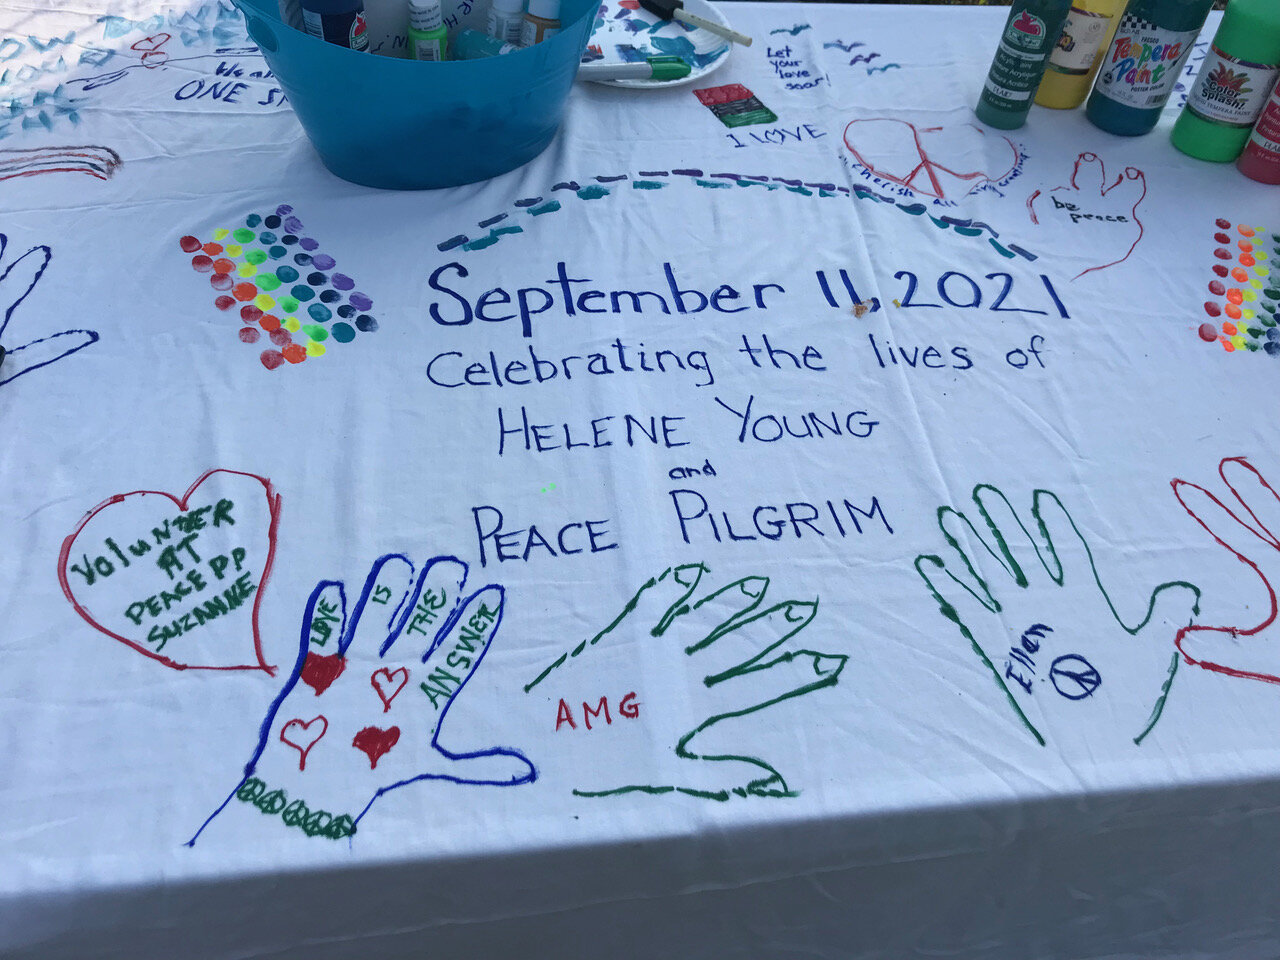  Handprints for peace cover the celebration cloth.  